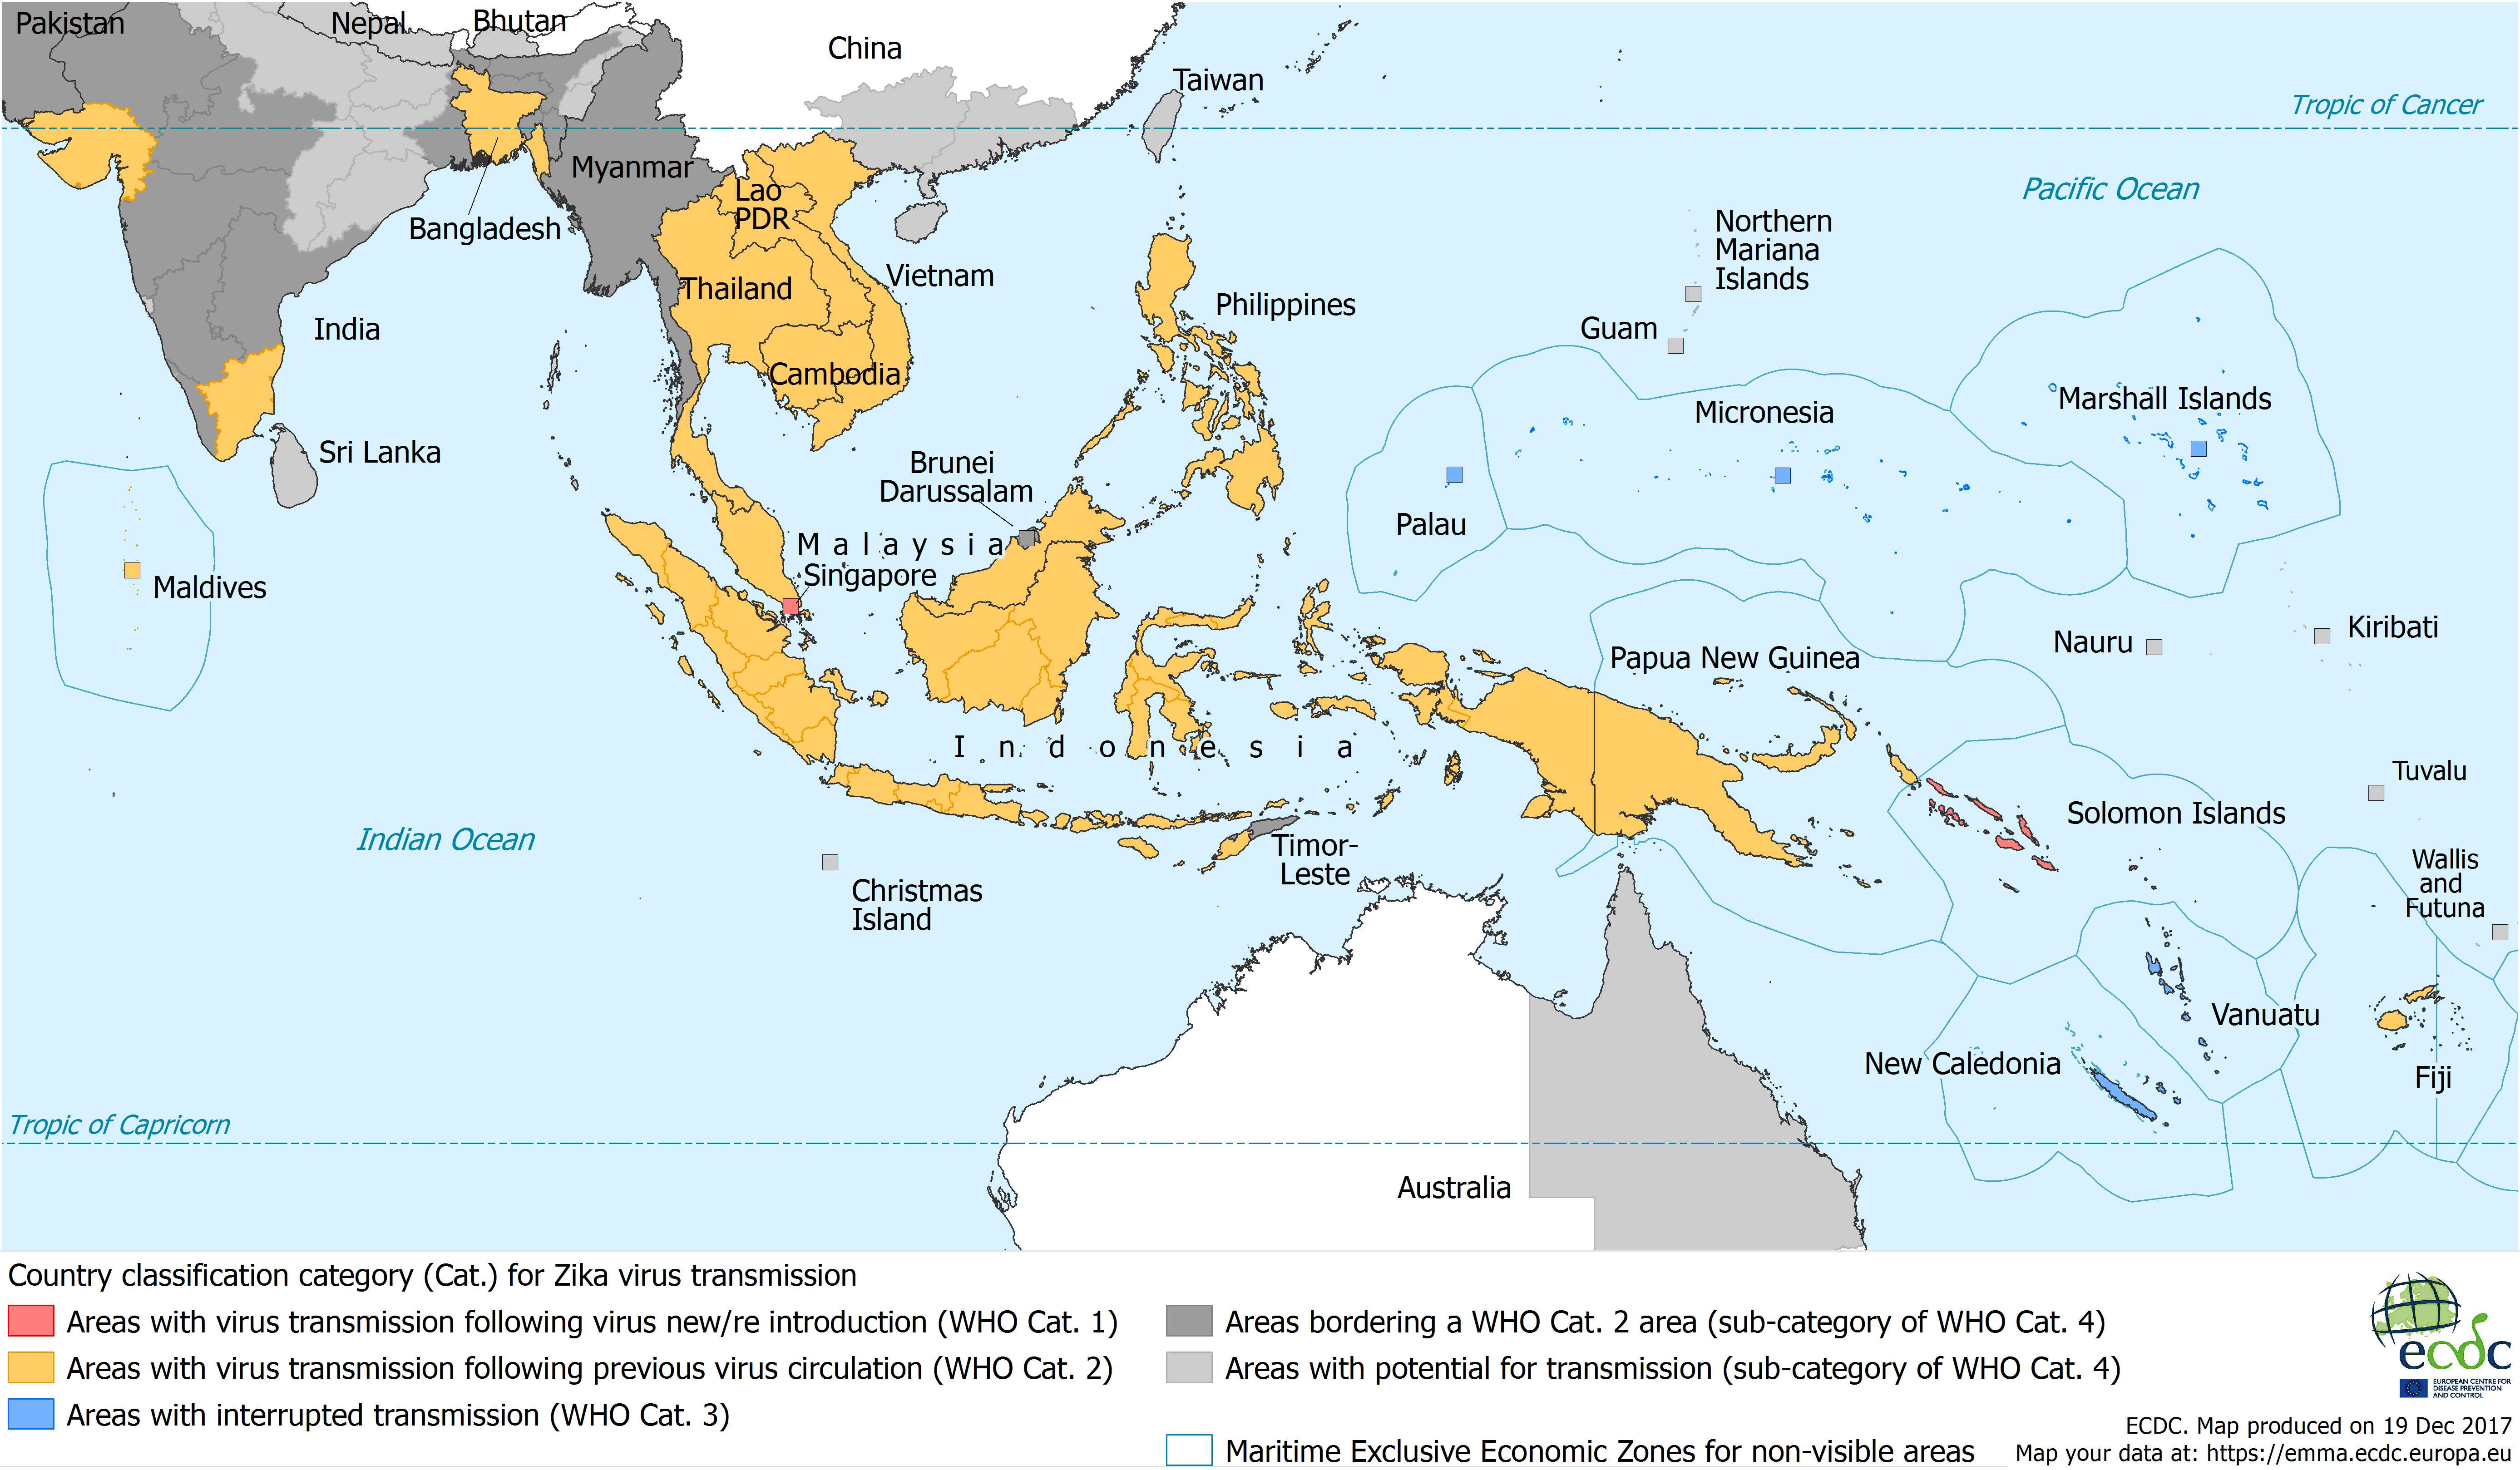 Zika transmission in South East Asia5550 x 3238